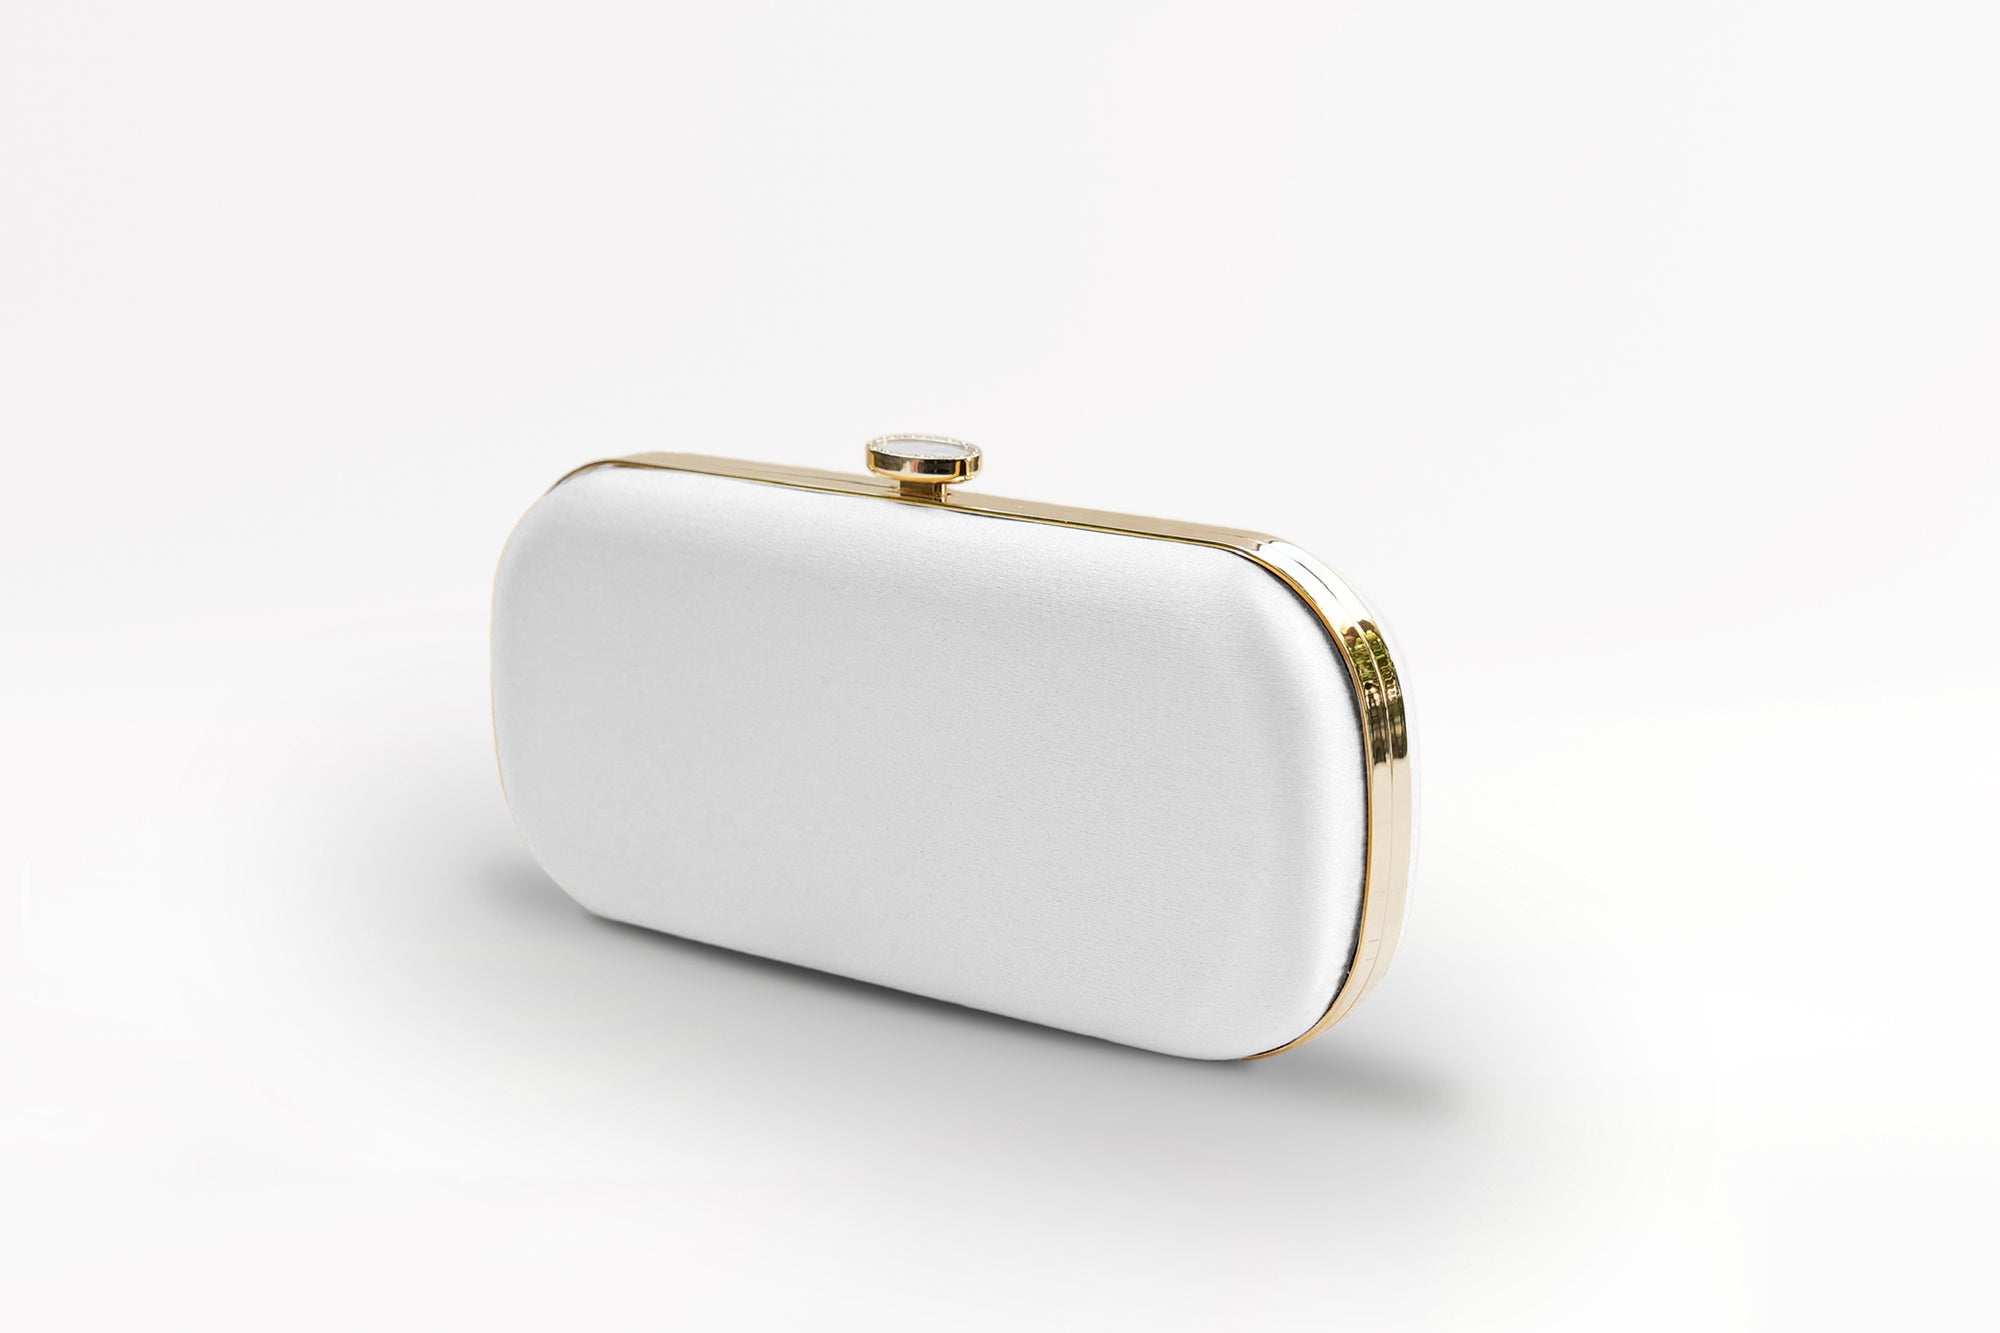 A white clutch bag on a white surface.